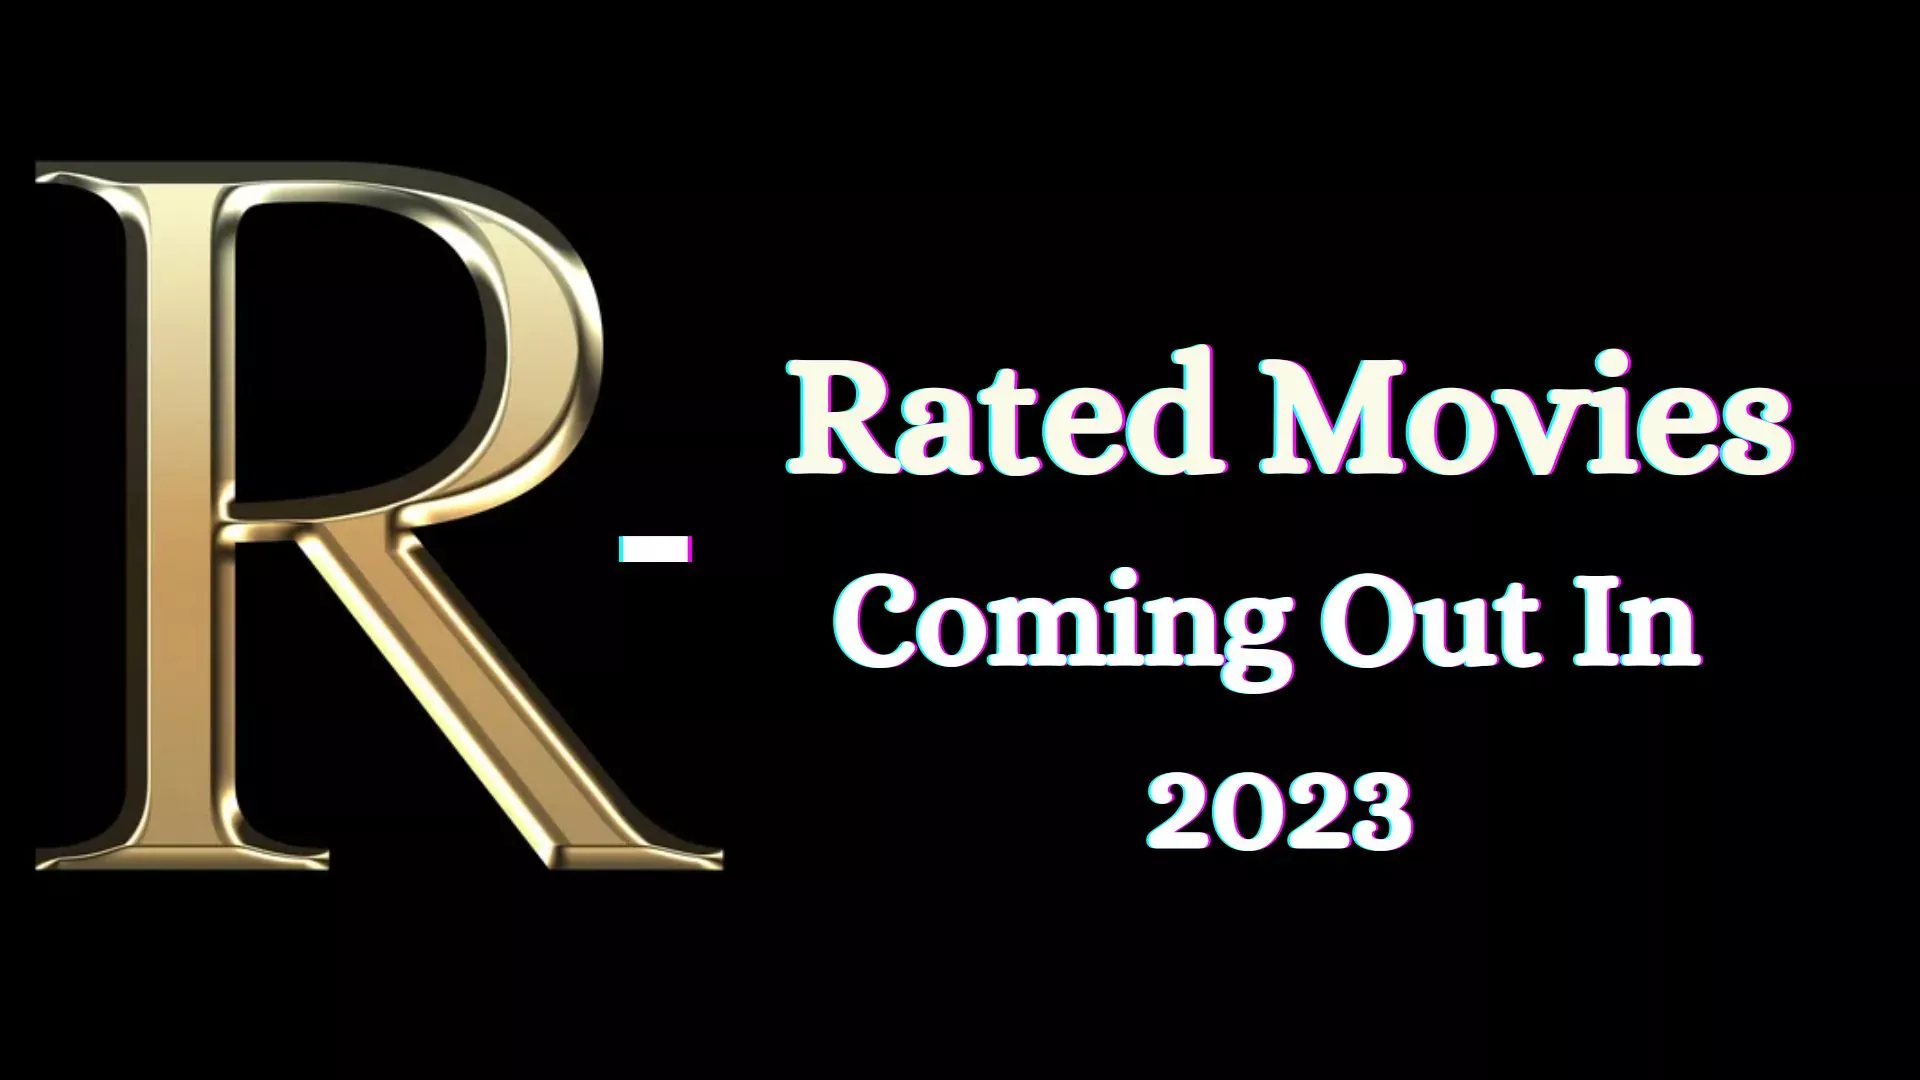 R Rated Movies Coming Out In 2023